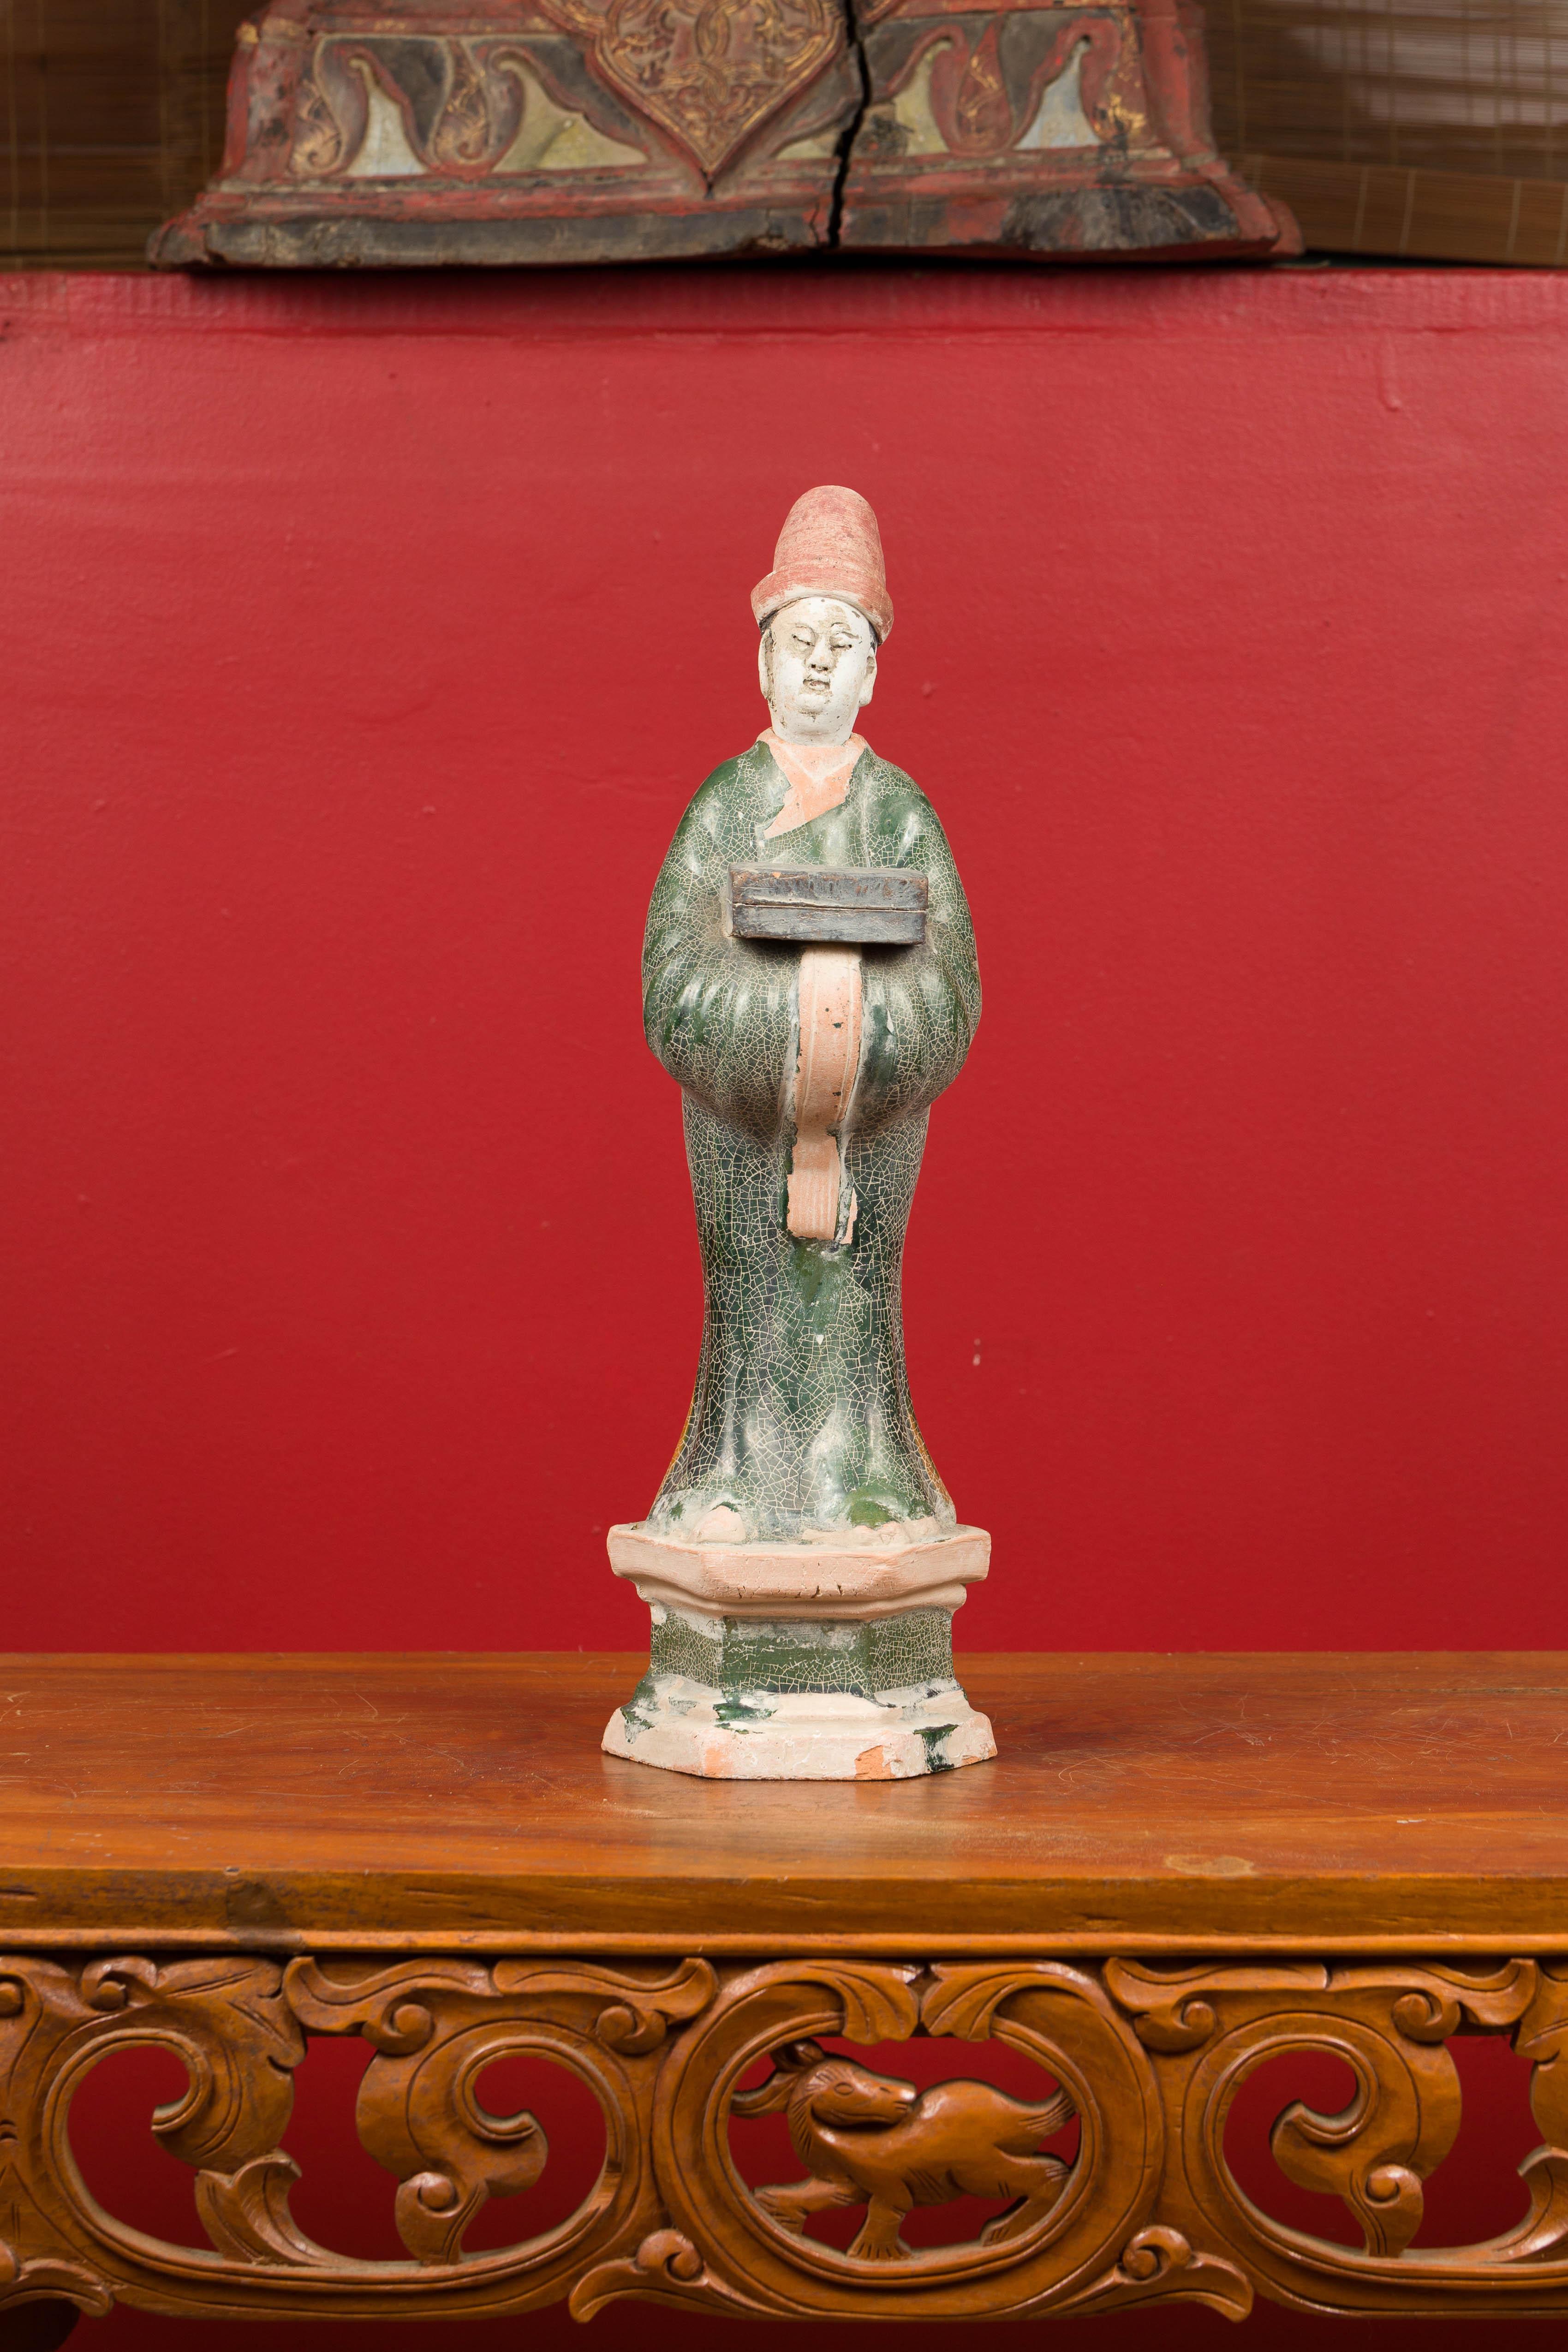 A petite antique Chinese Ming Dynasty period glazed terracotta statue from the 17th century, depicting an official holding a box. Presenting a nice patina, this Ming Dynasty statue attracts our attention with its red, green and white tones. The